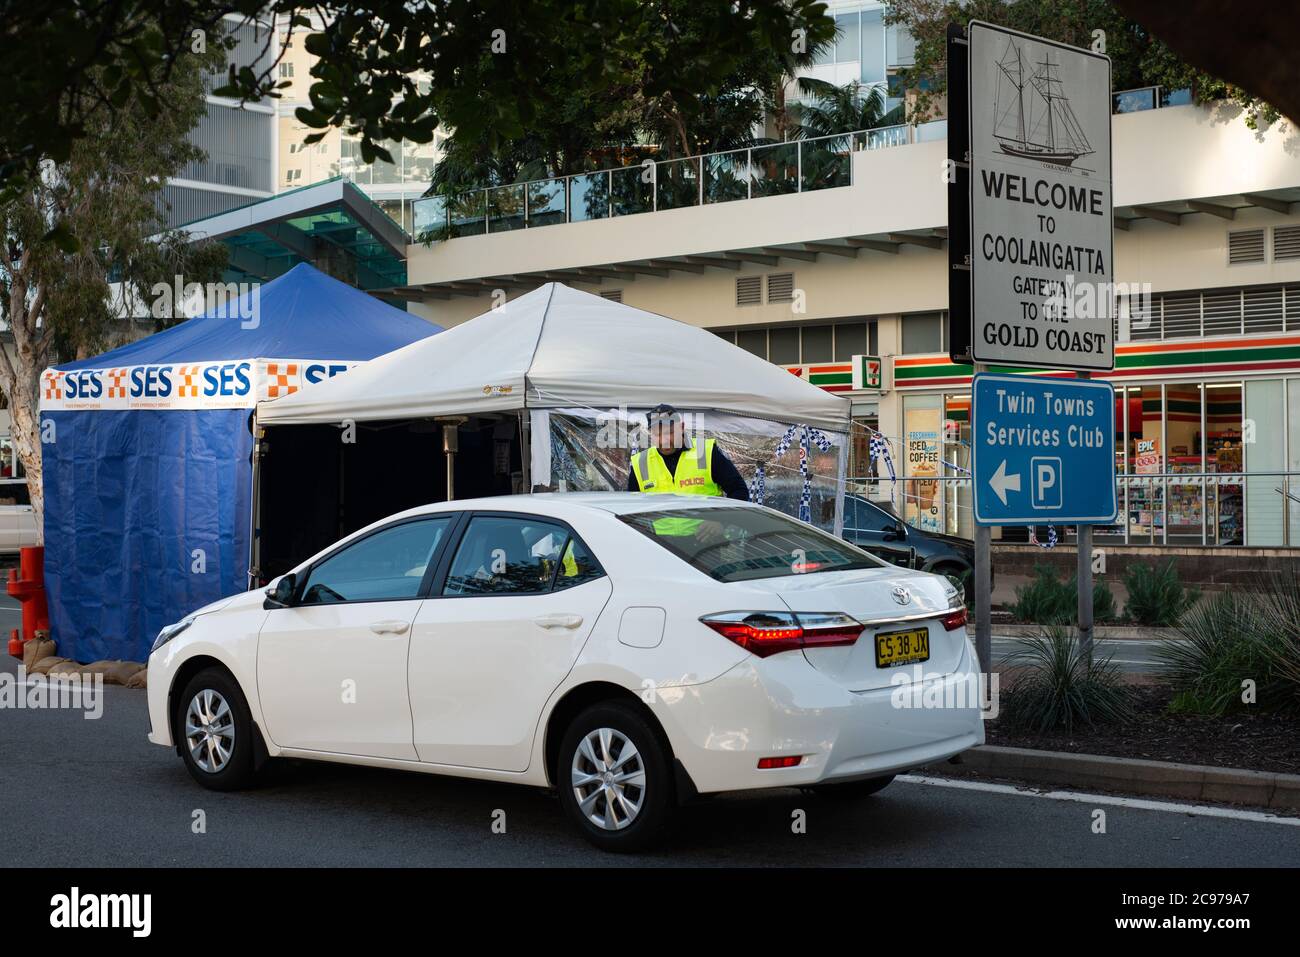 Coolangatta, Qld, Australia - July 16, 2020: police check point at the border between NSW and Qld. As part of covid19 restrictions the border had been Stock Photo